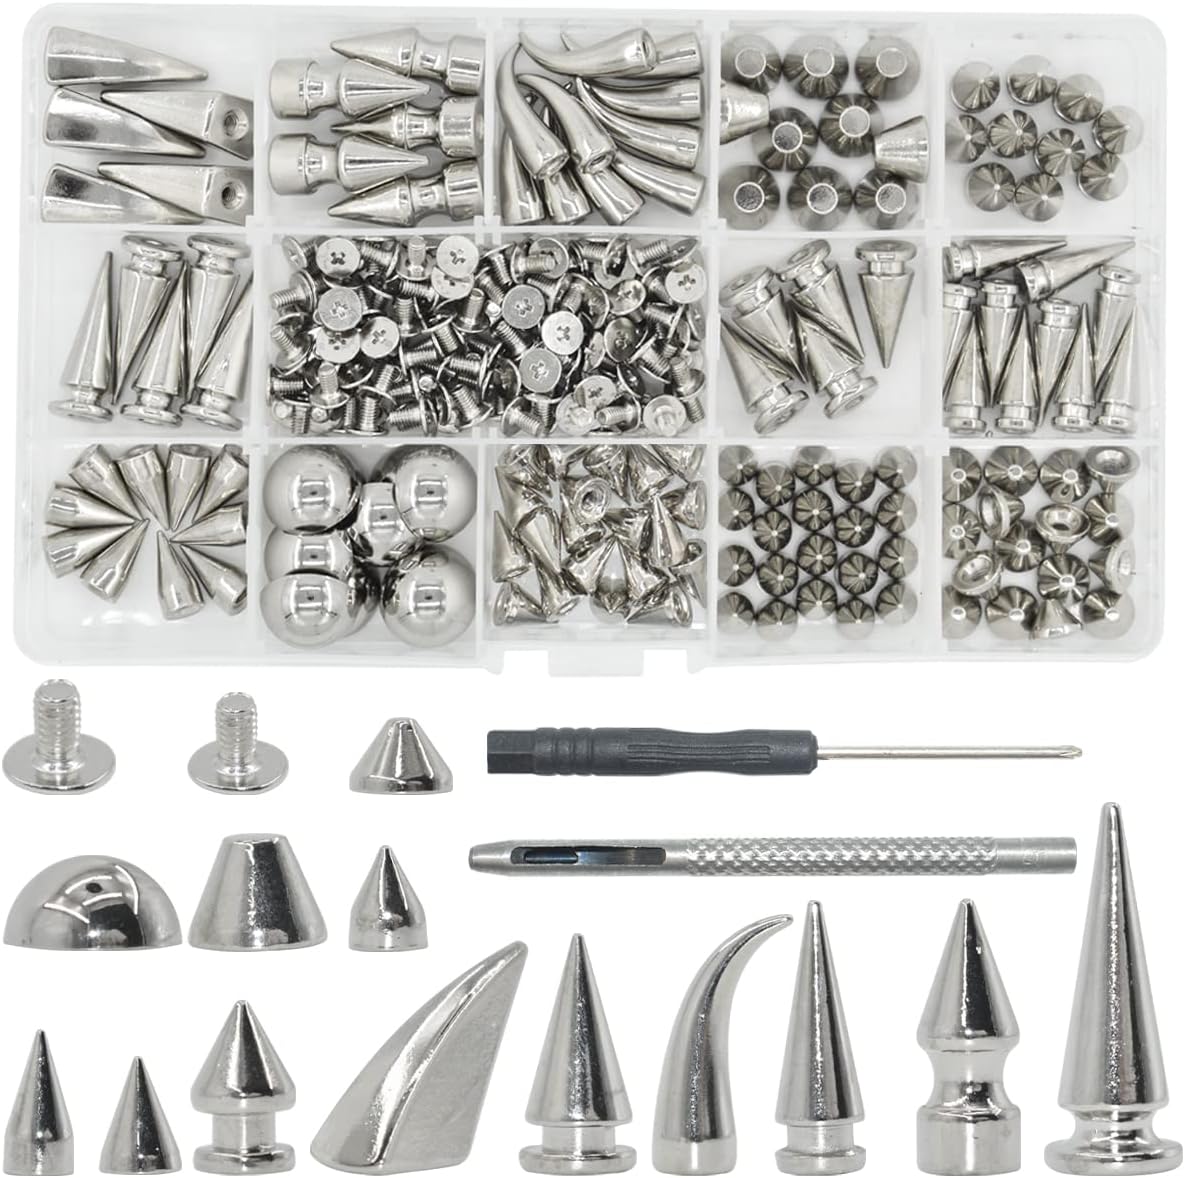  40 Sets 40MM Spikes for Clothing, CAMXTOOL Cone Spikes and  Studs, Punk Spike Rivets, Long Metal Spikes for Crafts, Punk Screw Rivet  for Clothes Jackets Leather and Shoes (Silver)